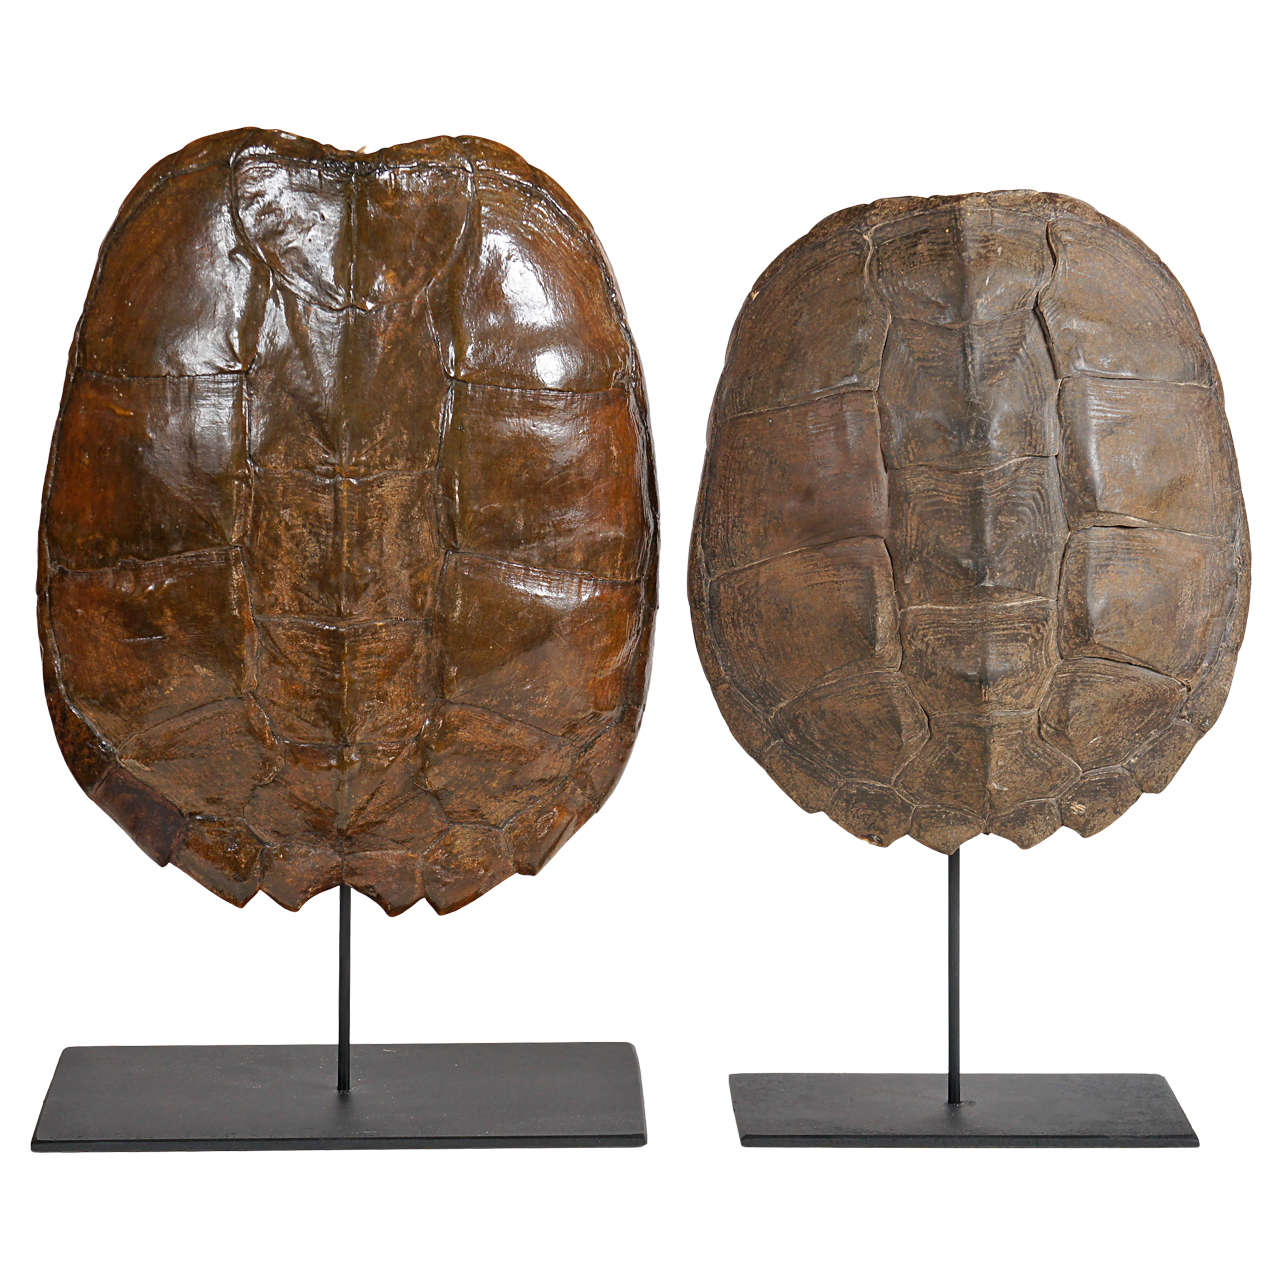 A Pair of Mounted Turtle Shells